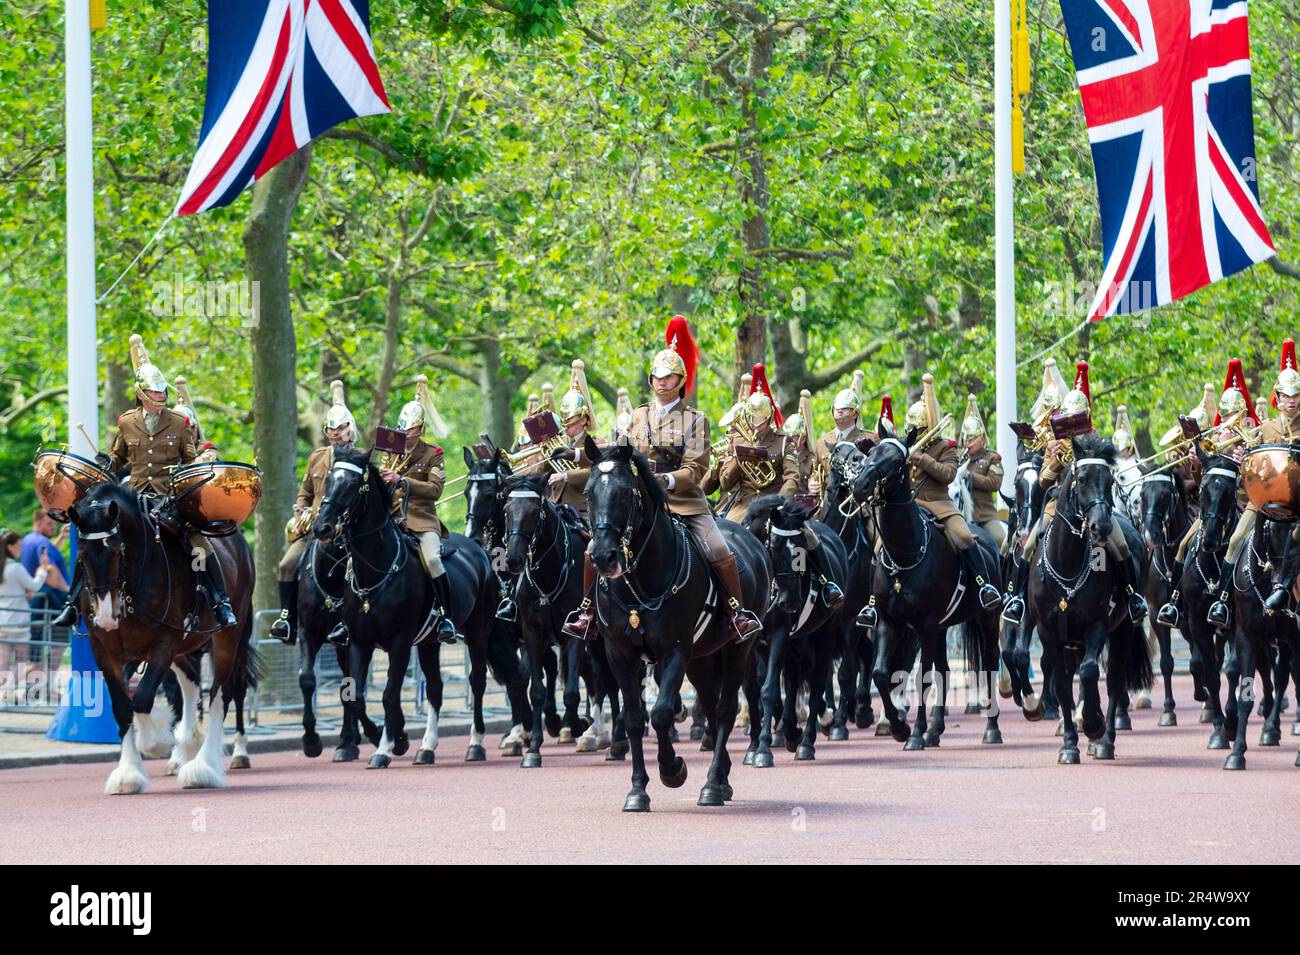 London, UK.  30 May 2023.  Members of the Household Division, out of ceremonial uniform, pass down The Mall towards Horse Guards Parade during a rehearsal for Trooping the Colour.  The Sovereign's birthday is officially celebrated by the ceremony of Trooping the Colour (King's Birthday Parade) and will be the first for King Charles.  A display of military pageantry will take place on 17 June with regiments of the Household Division marching down The Mall to Horse Guards Parade, where the King will attend and take the salute.  Credit: Stephen Chung / Alamy Live News Stock Photo